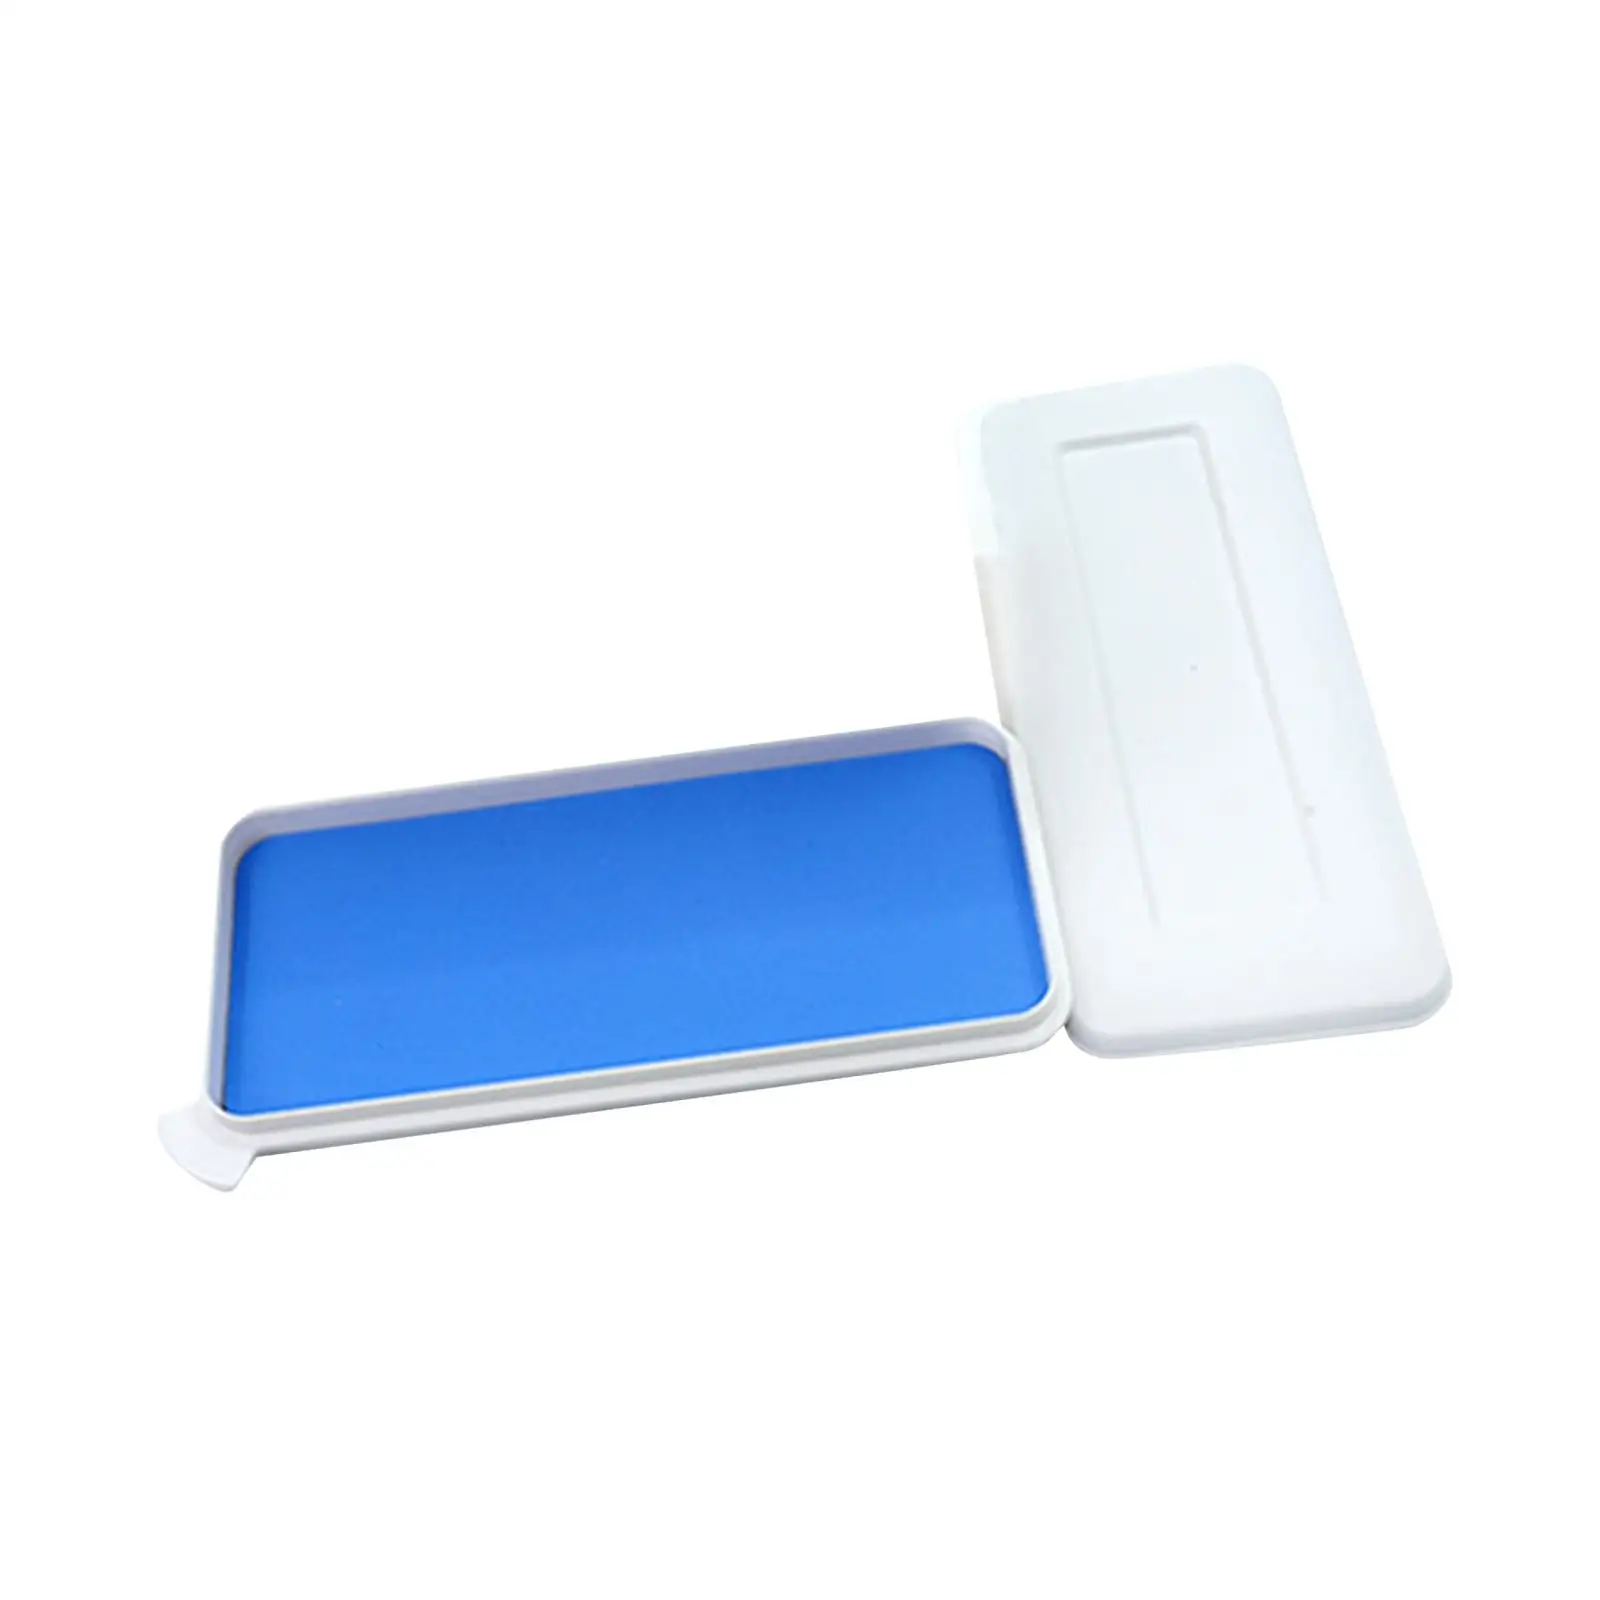 Wet Palette for Acrylic Painting Paint Palette for Hobby DIY Acrylic Paints